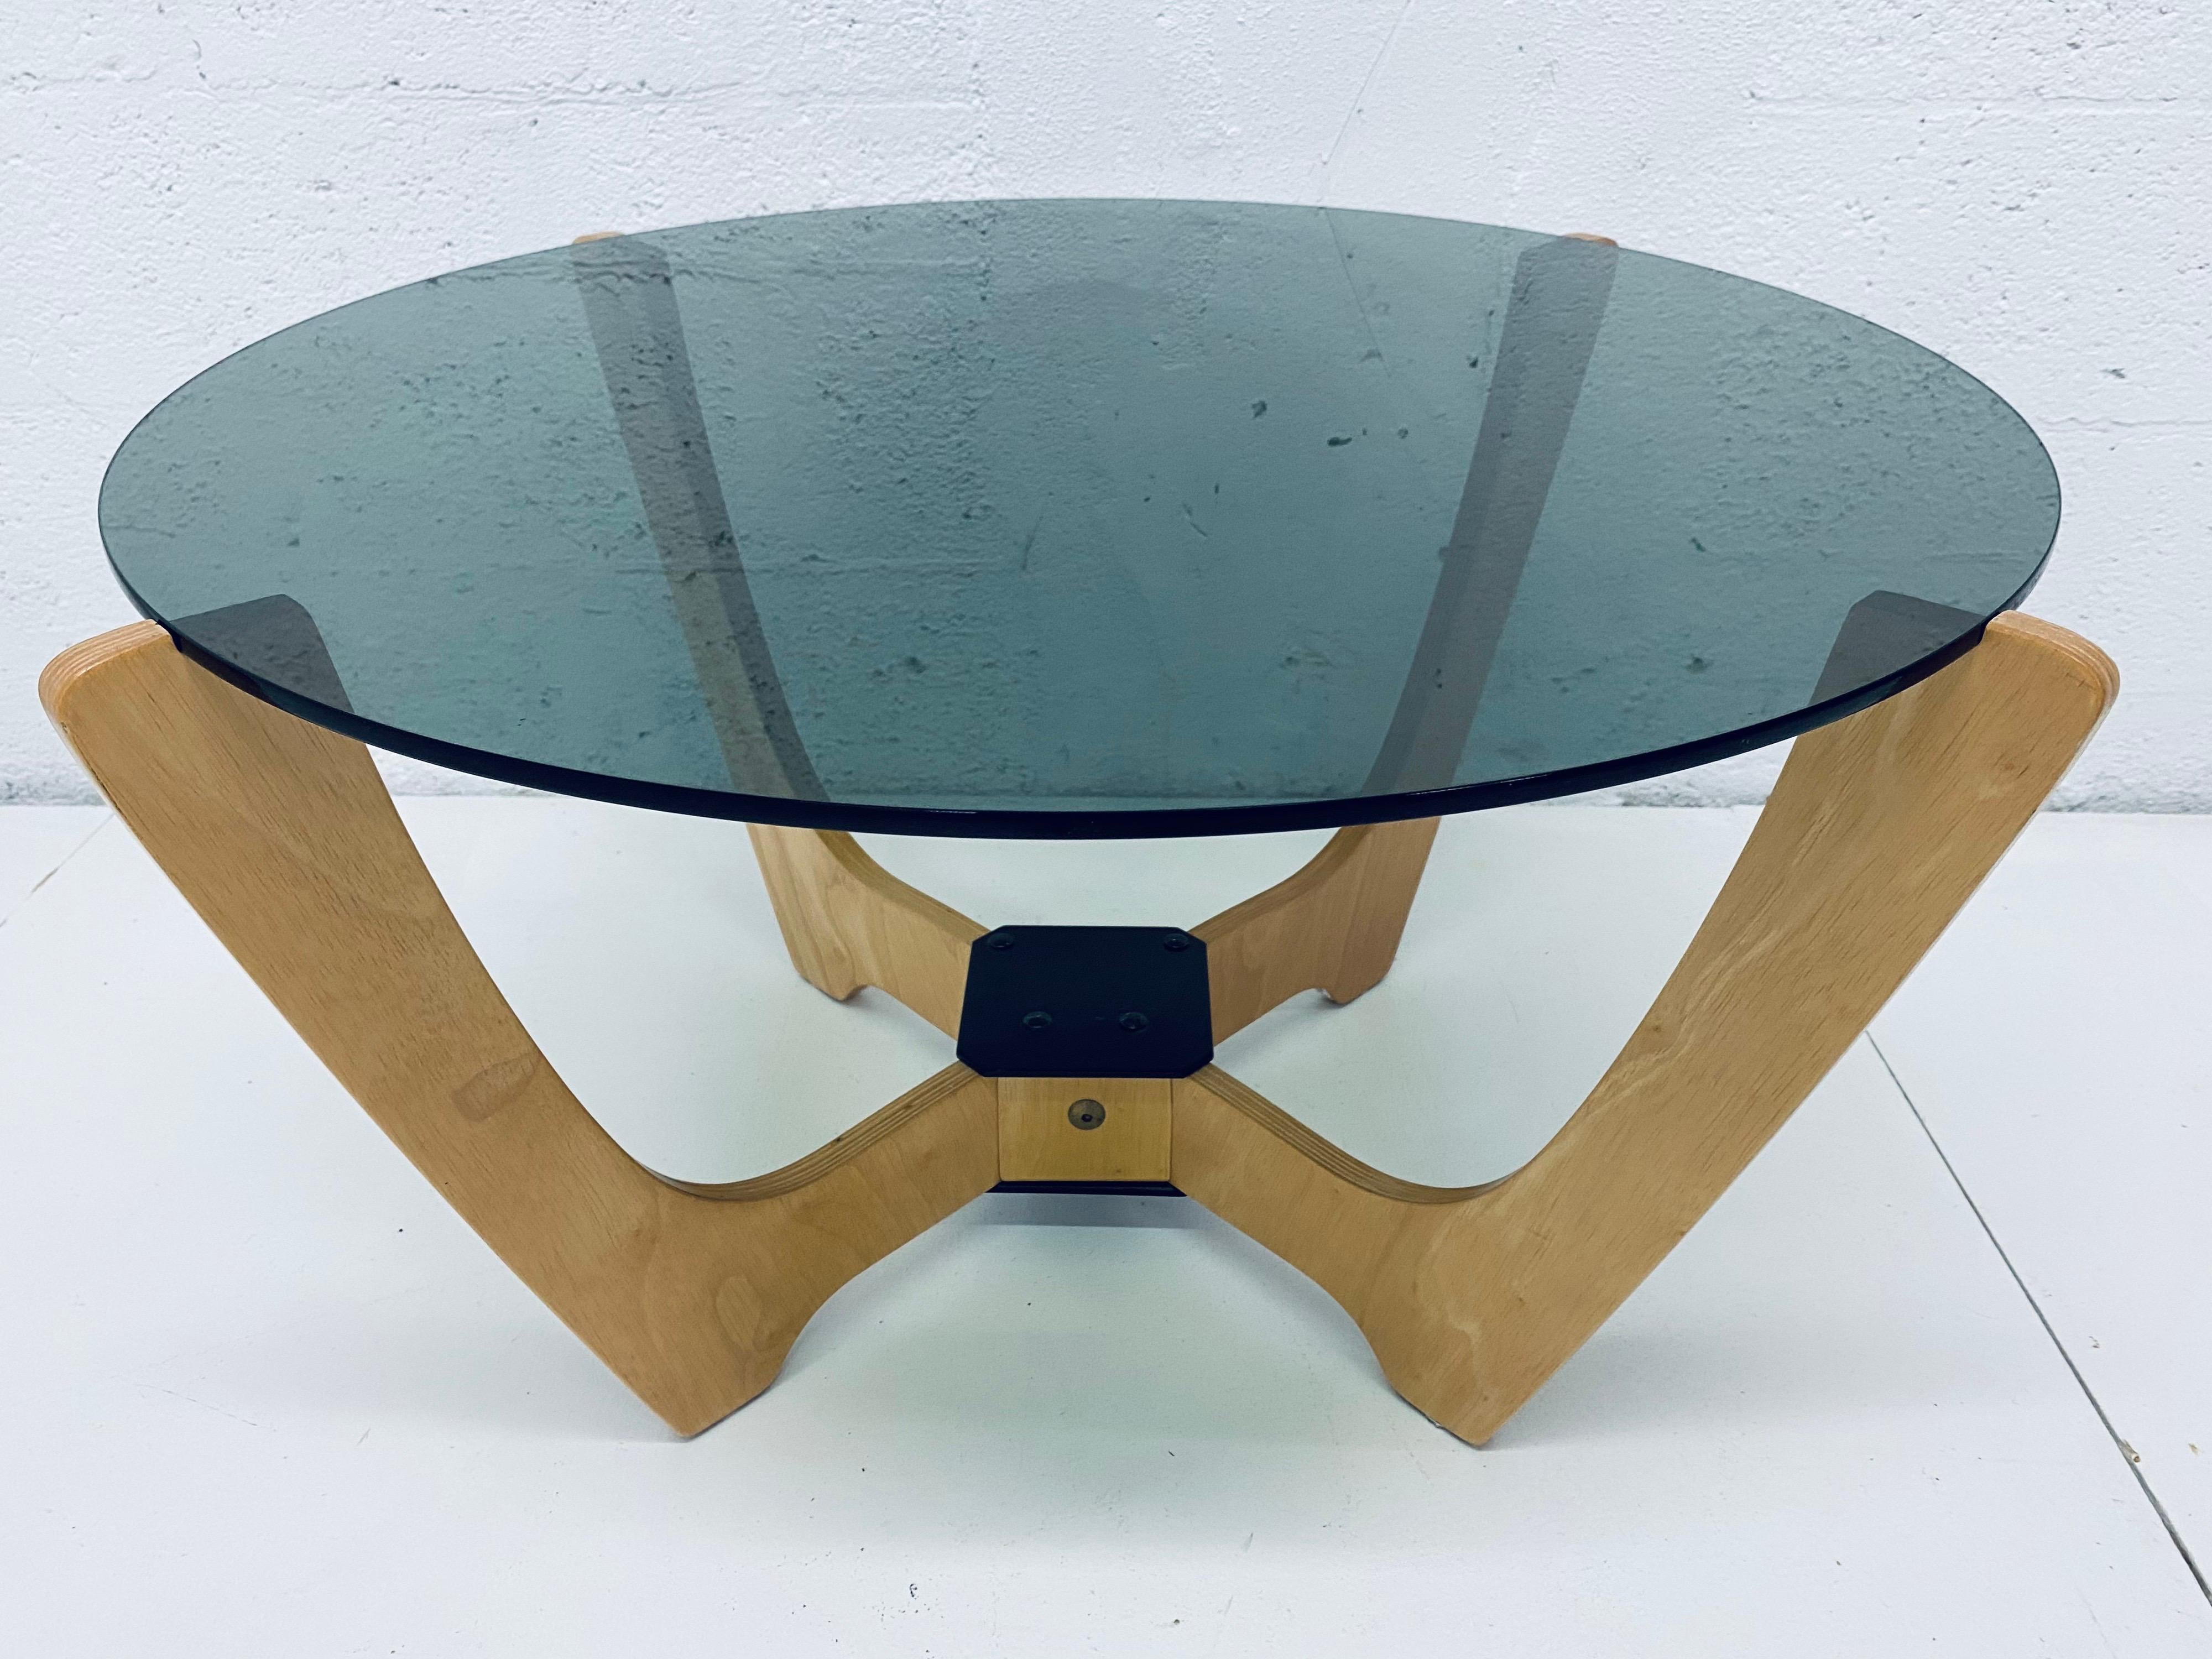 Late 20th Century Odd Knutsen Midcentury Danish Modern Beech Wood and Glass Top Coffee Table For Sale